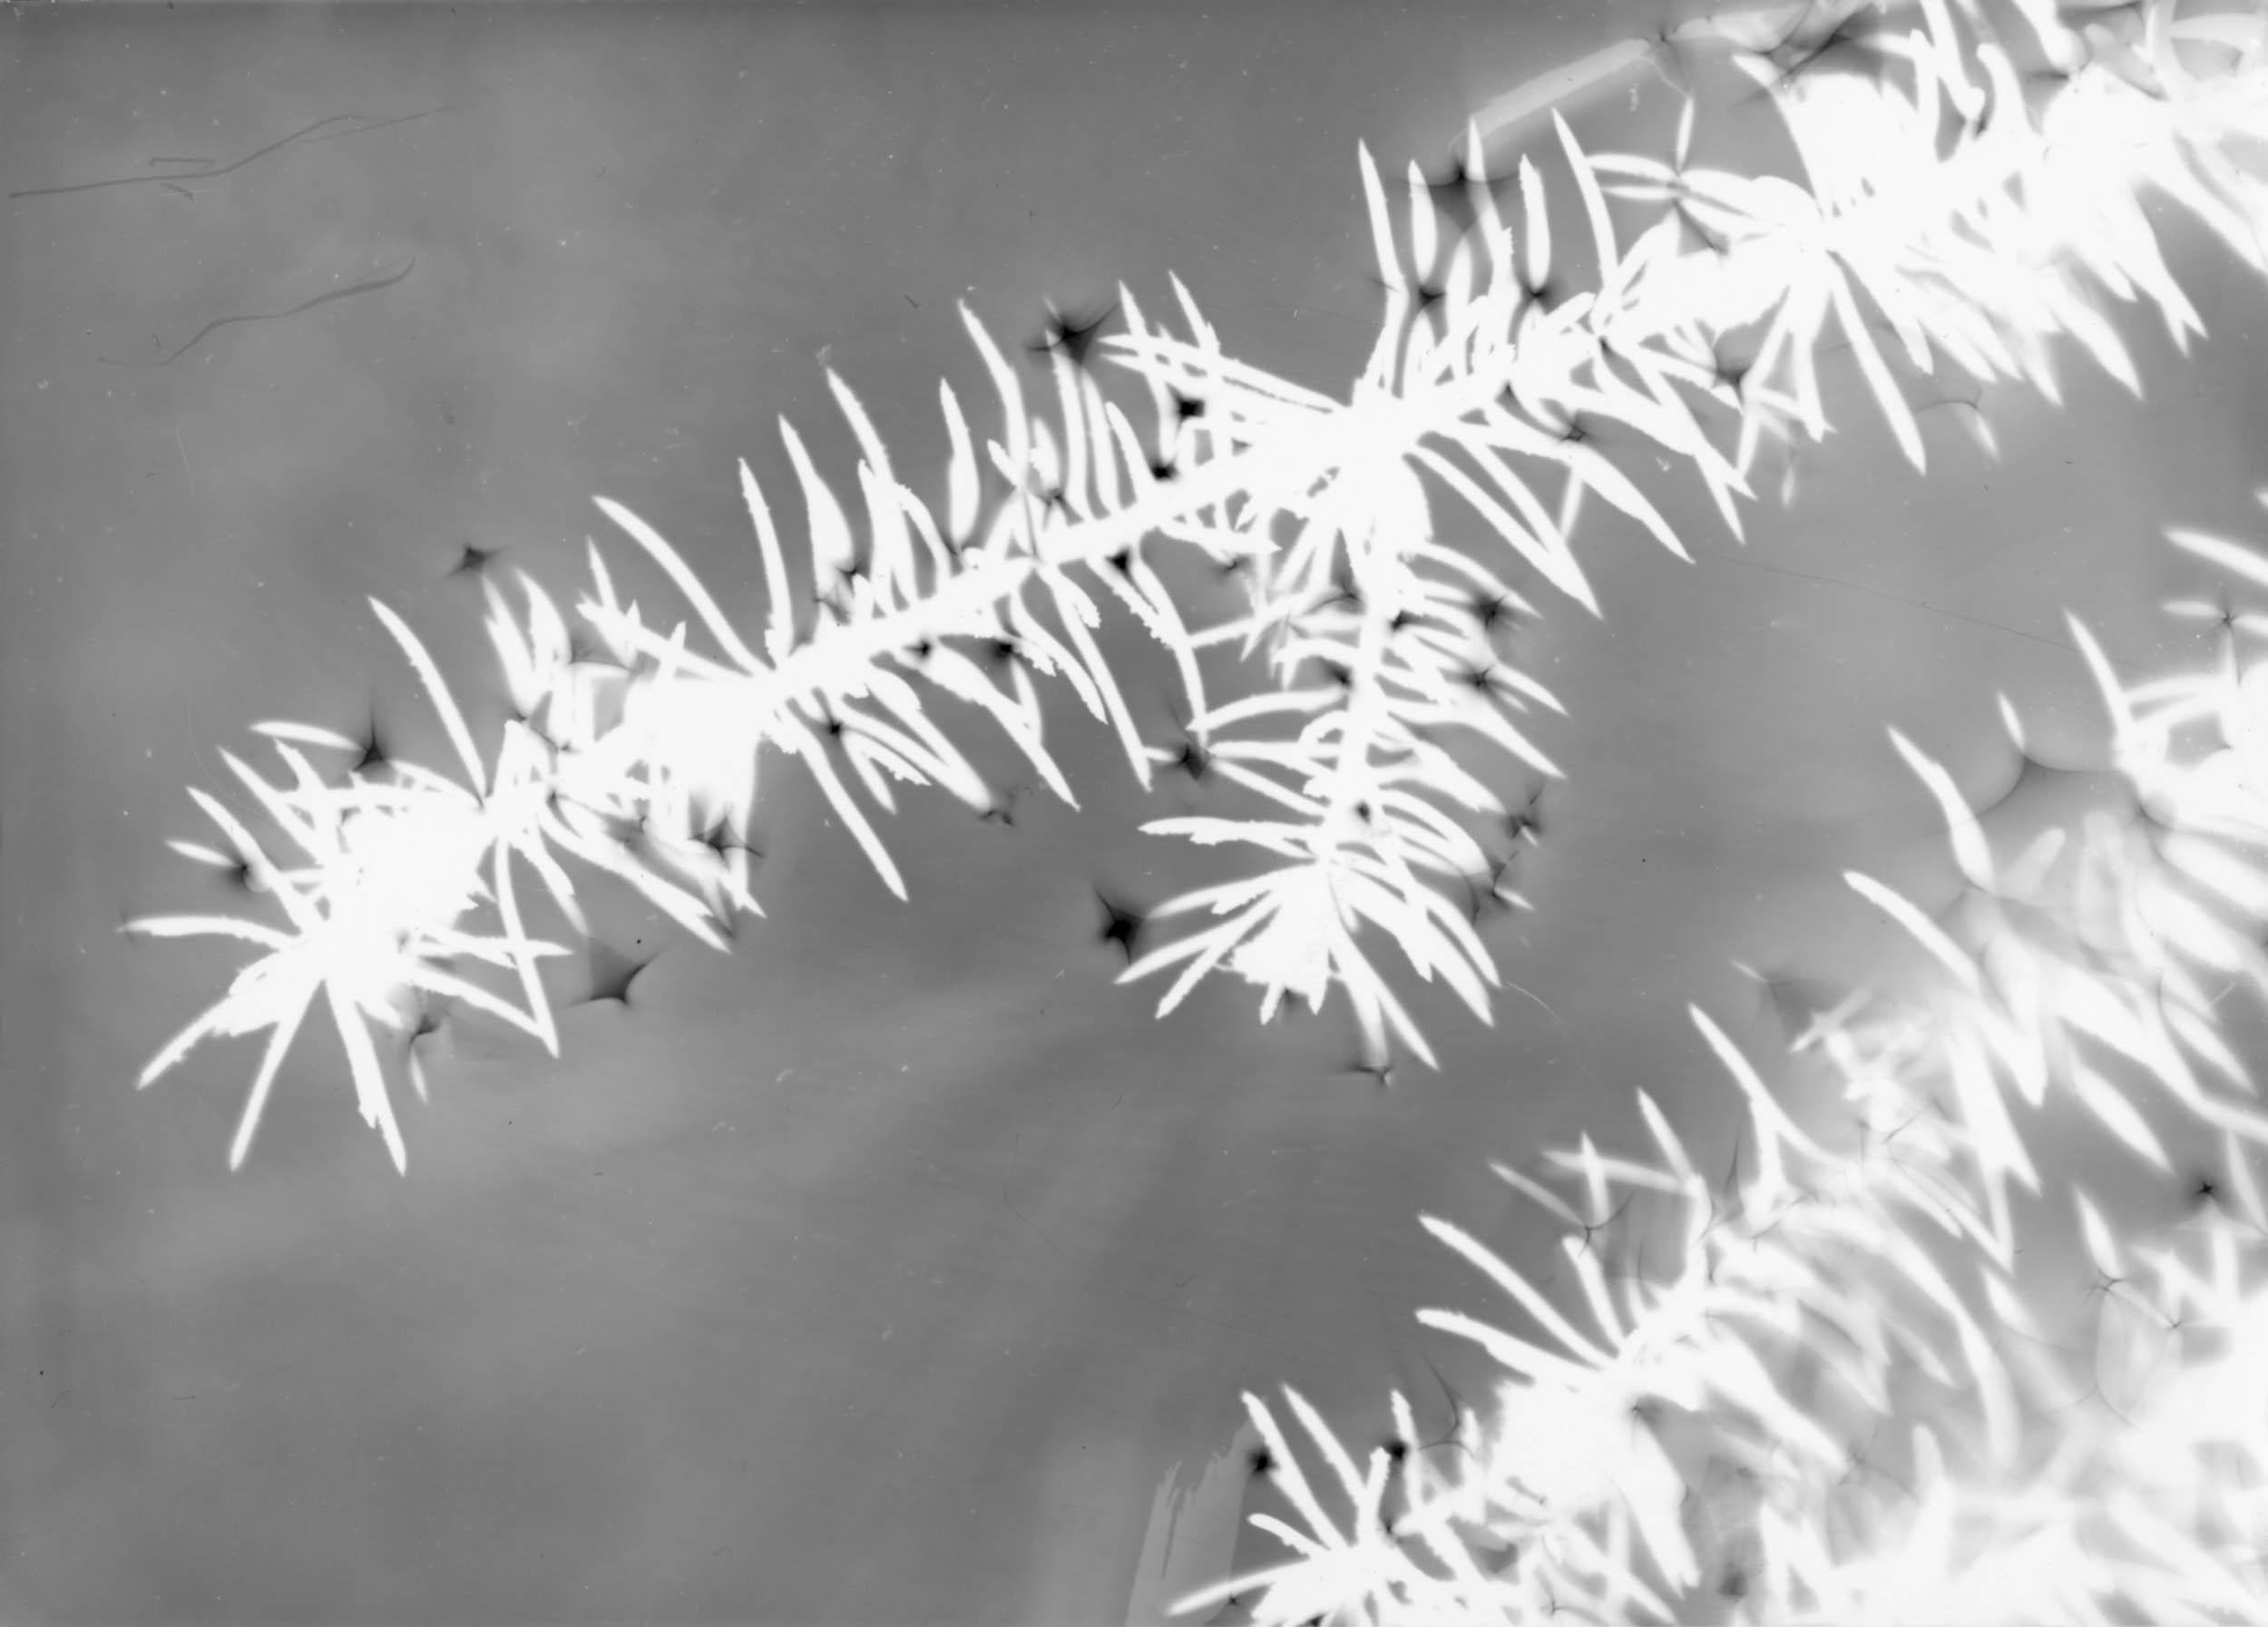 Black and white silver gelatin photogram of abstract white silhouette of evergreen tree branches on a grey background.